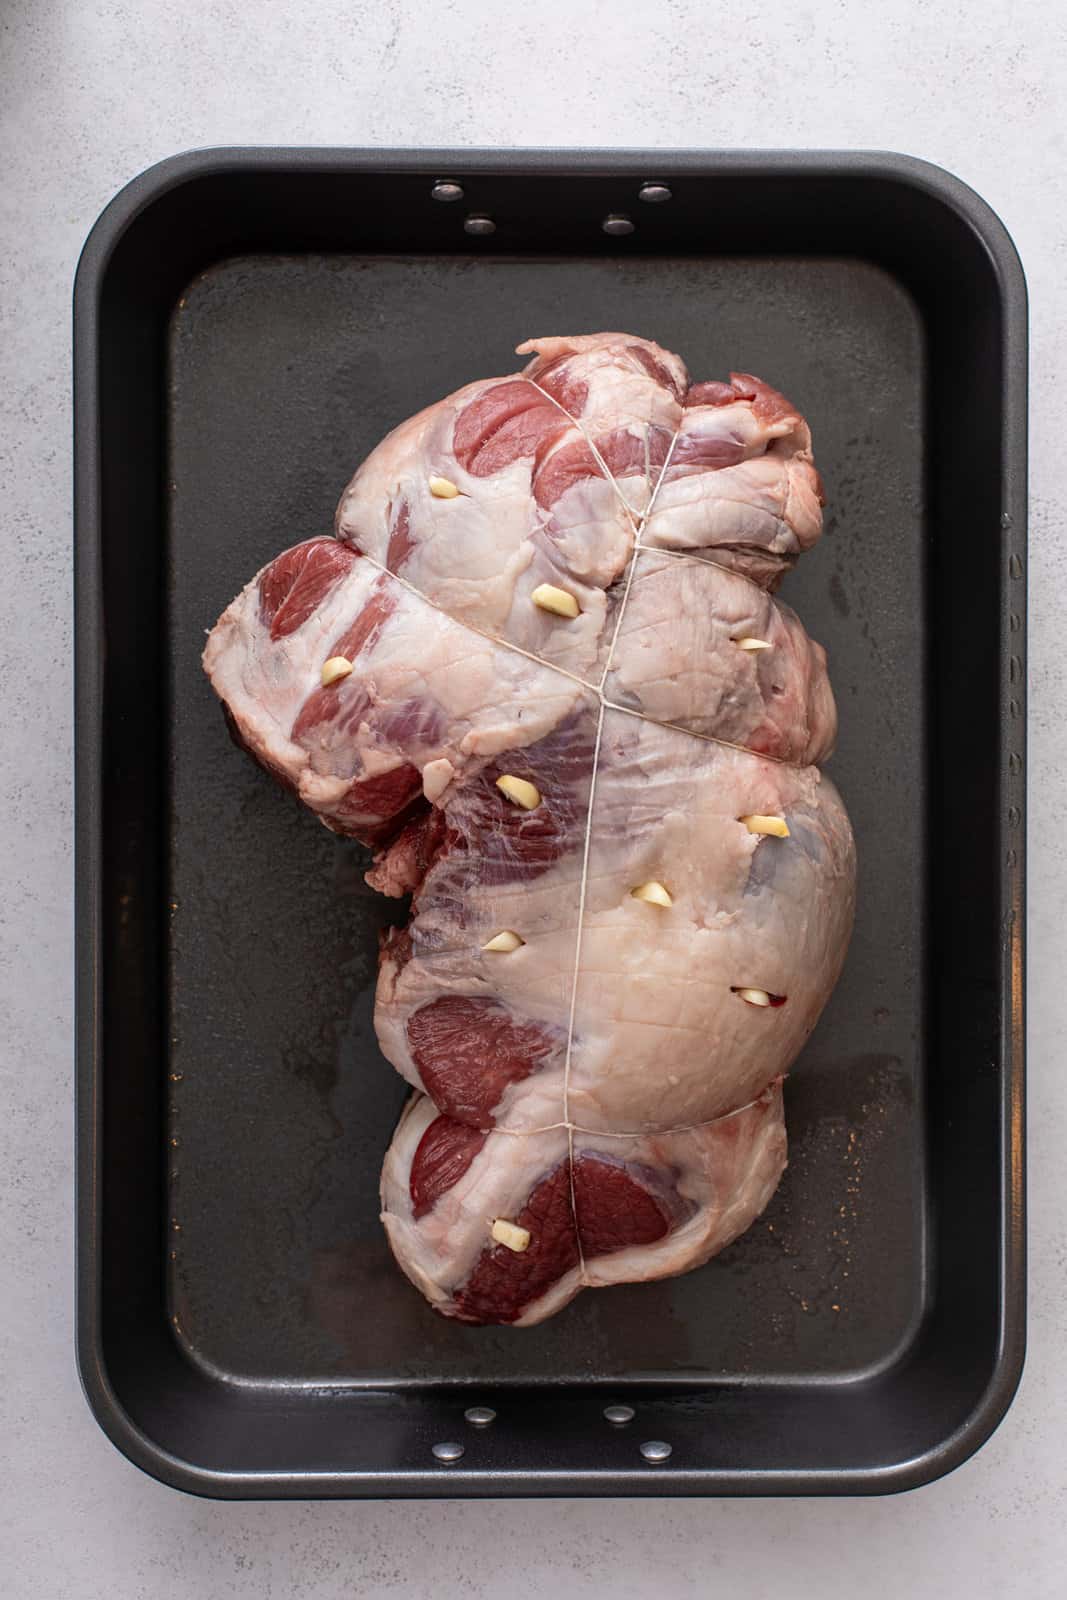 Boneless leg of lamb in a roasting pan, with garlic cloves inserted into the meat.